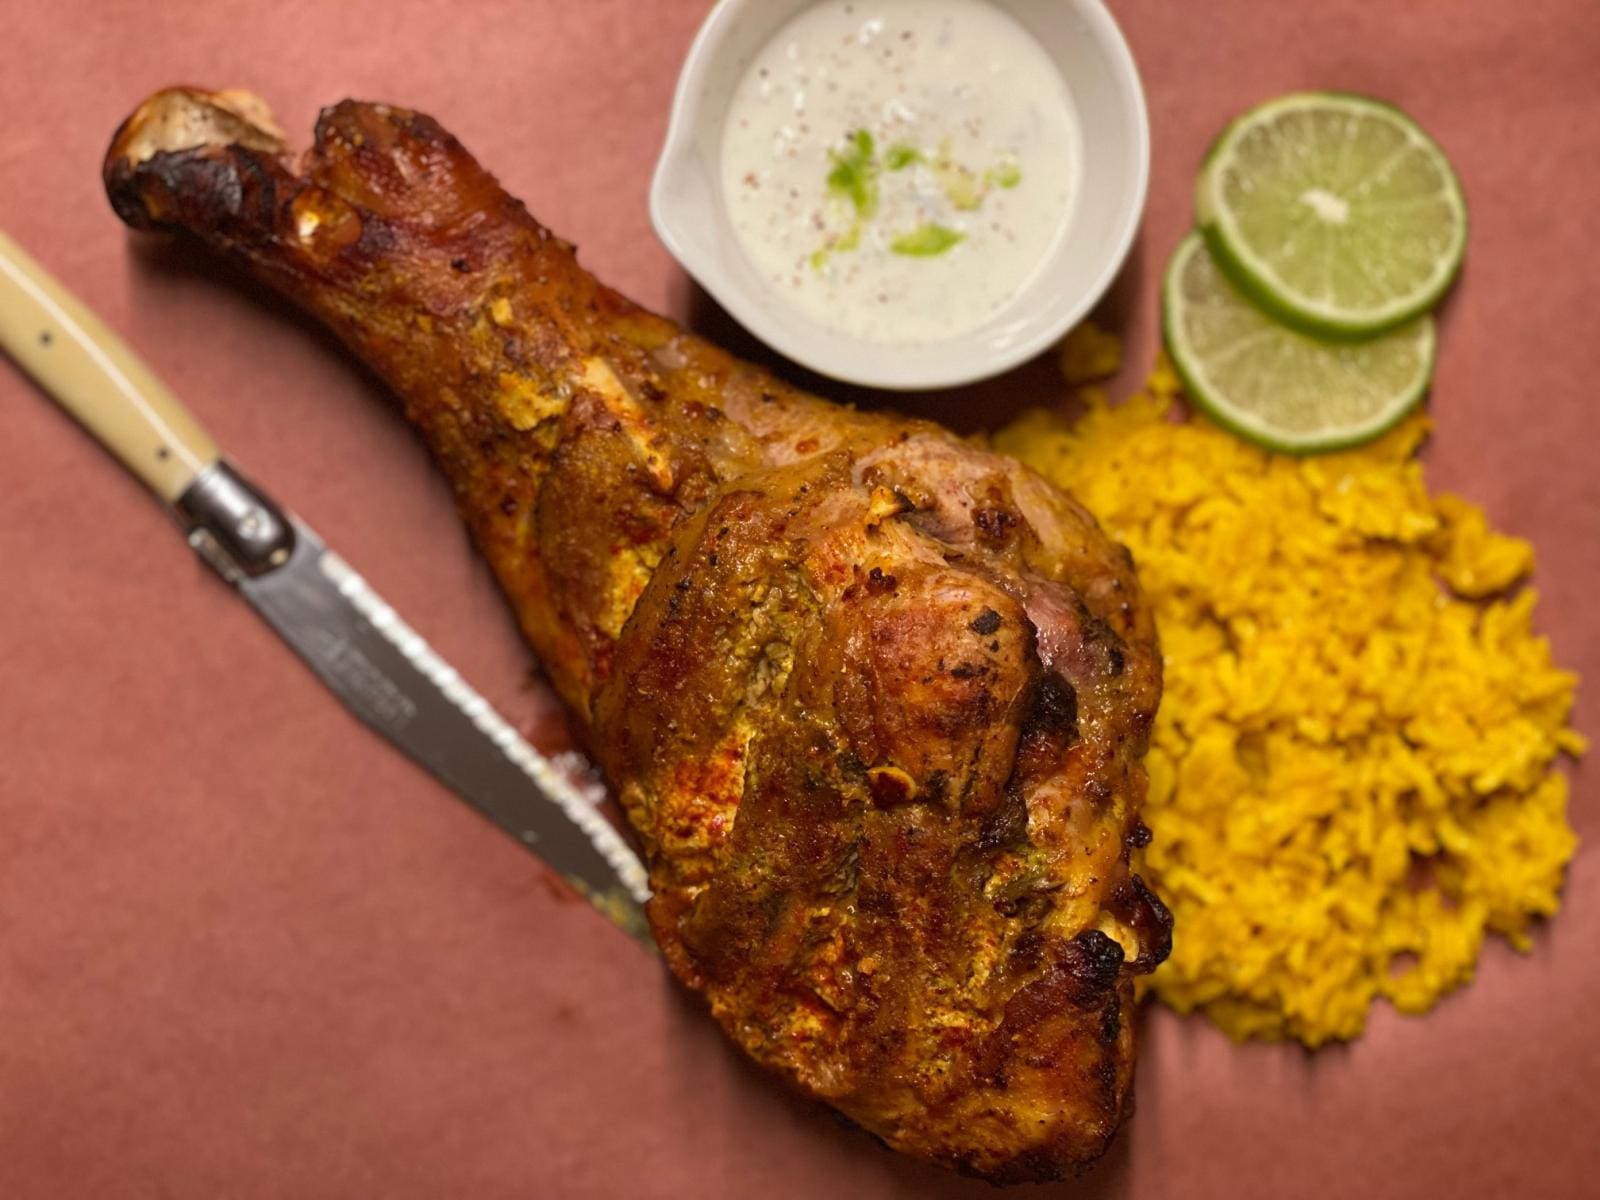 Certified organic, pasture raised turkey drumstick shown roasted on a serving paper with a carving knife alongside turmeric rice, lime slices, and yogurt sauce.